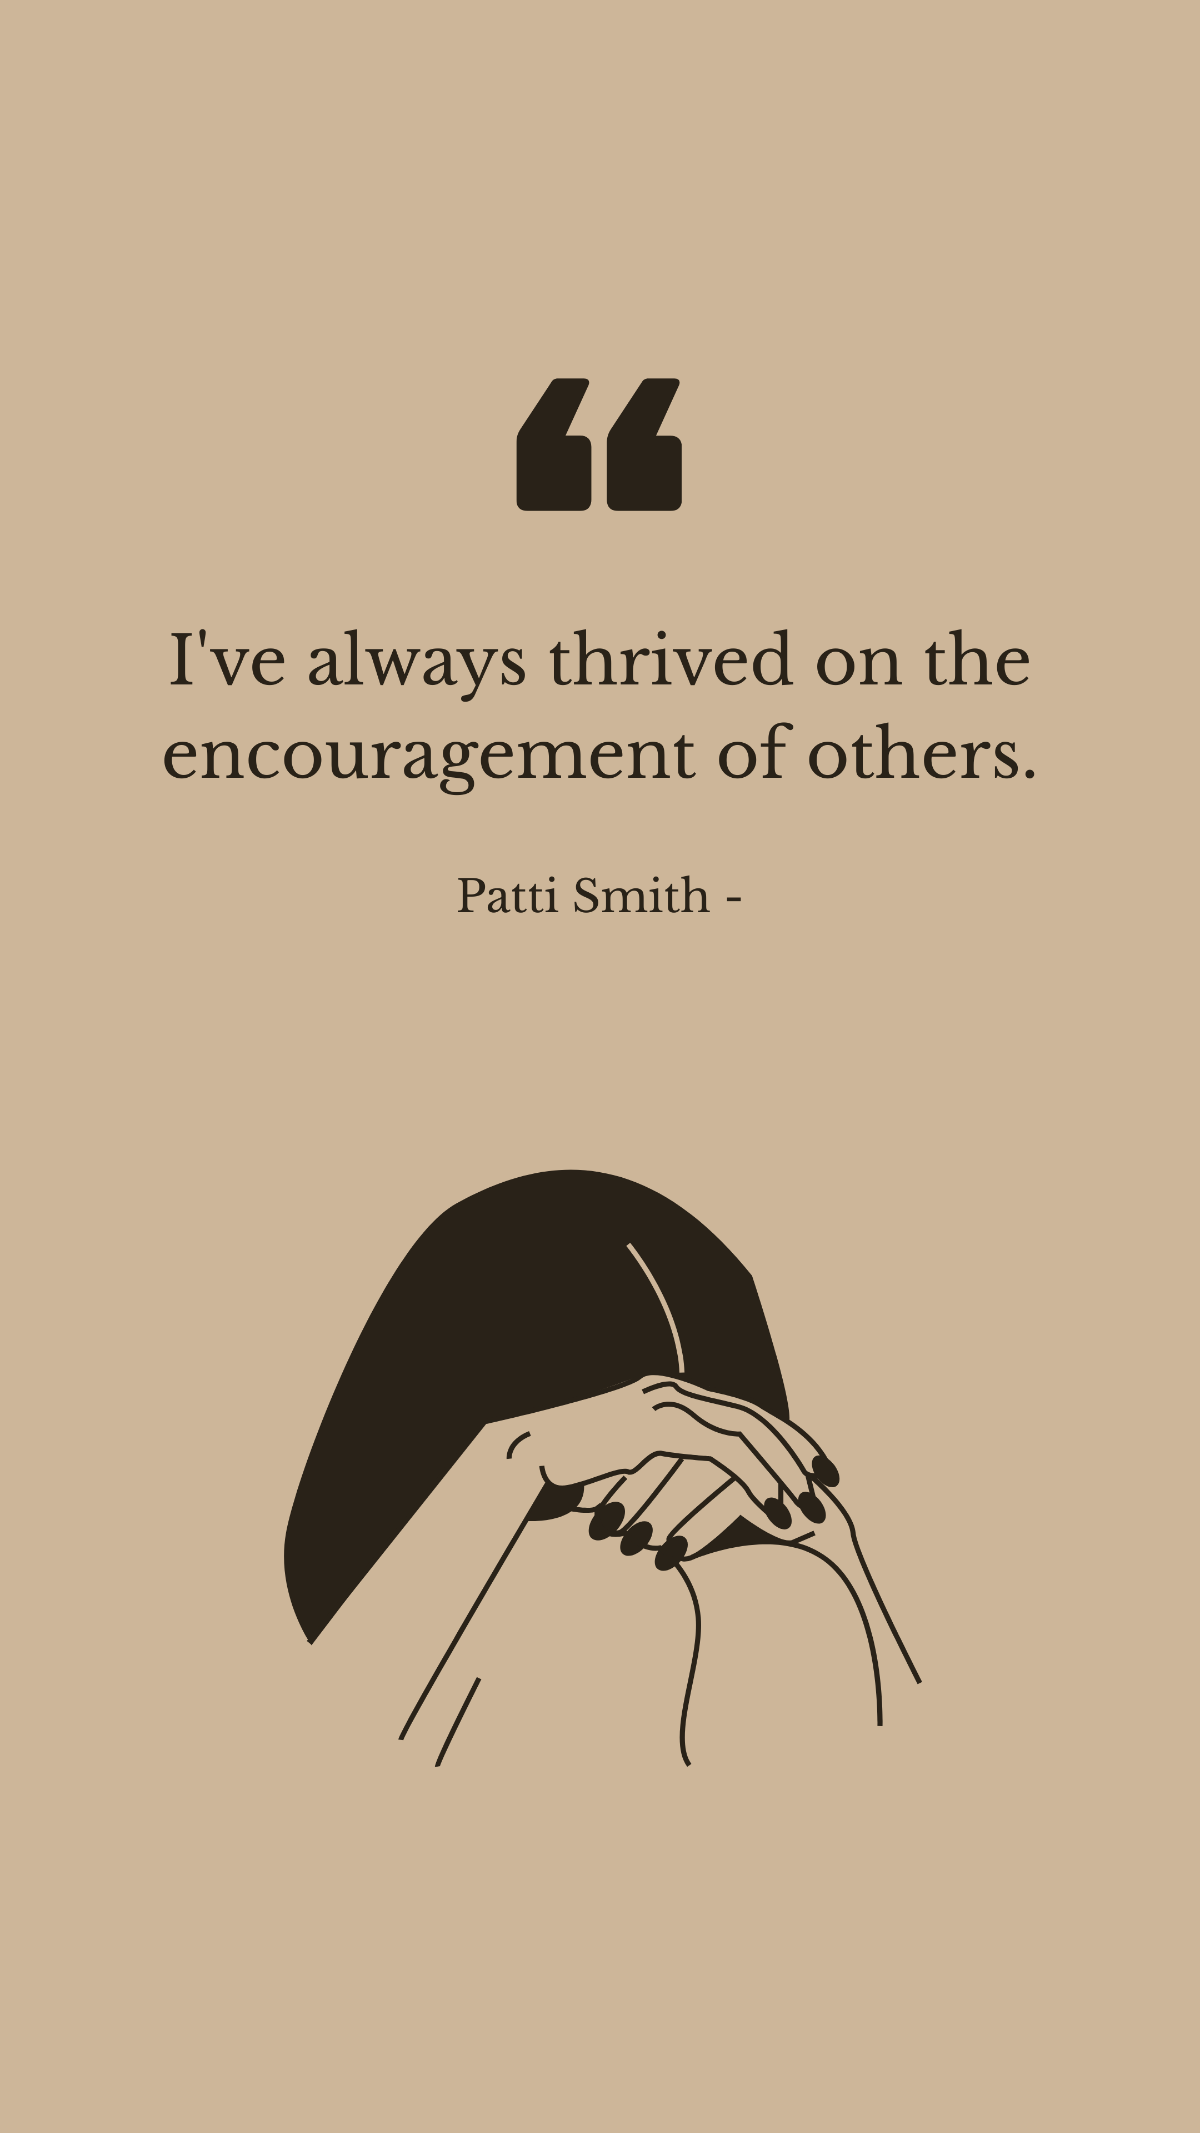 Free Patti Smith - I've always thrived on the encouragement of others. Template